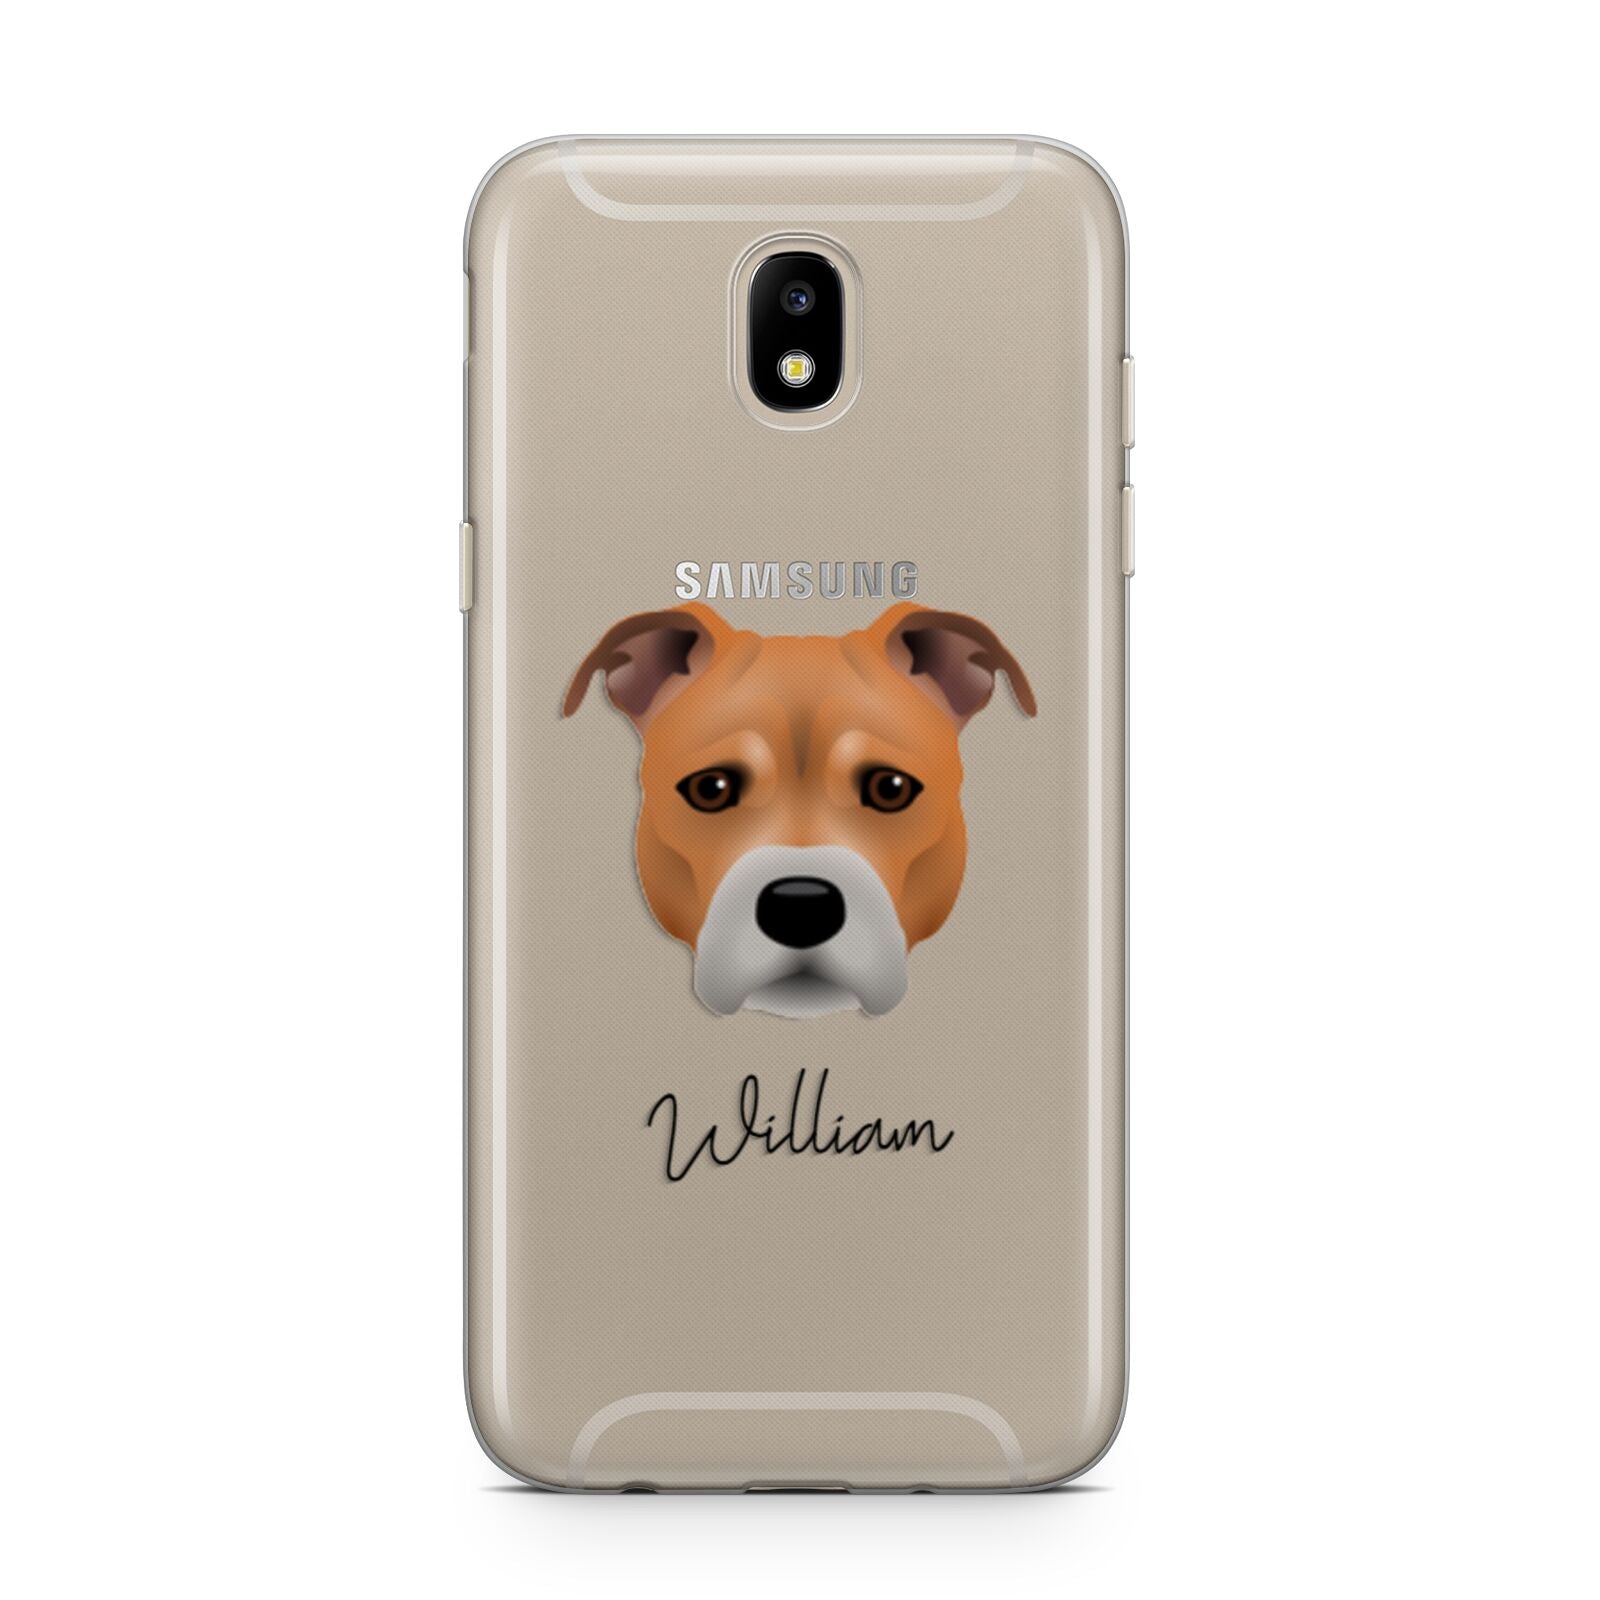 Staffordshire Bull Terrier Personalised Samsung J5 2017 Case